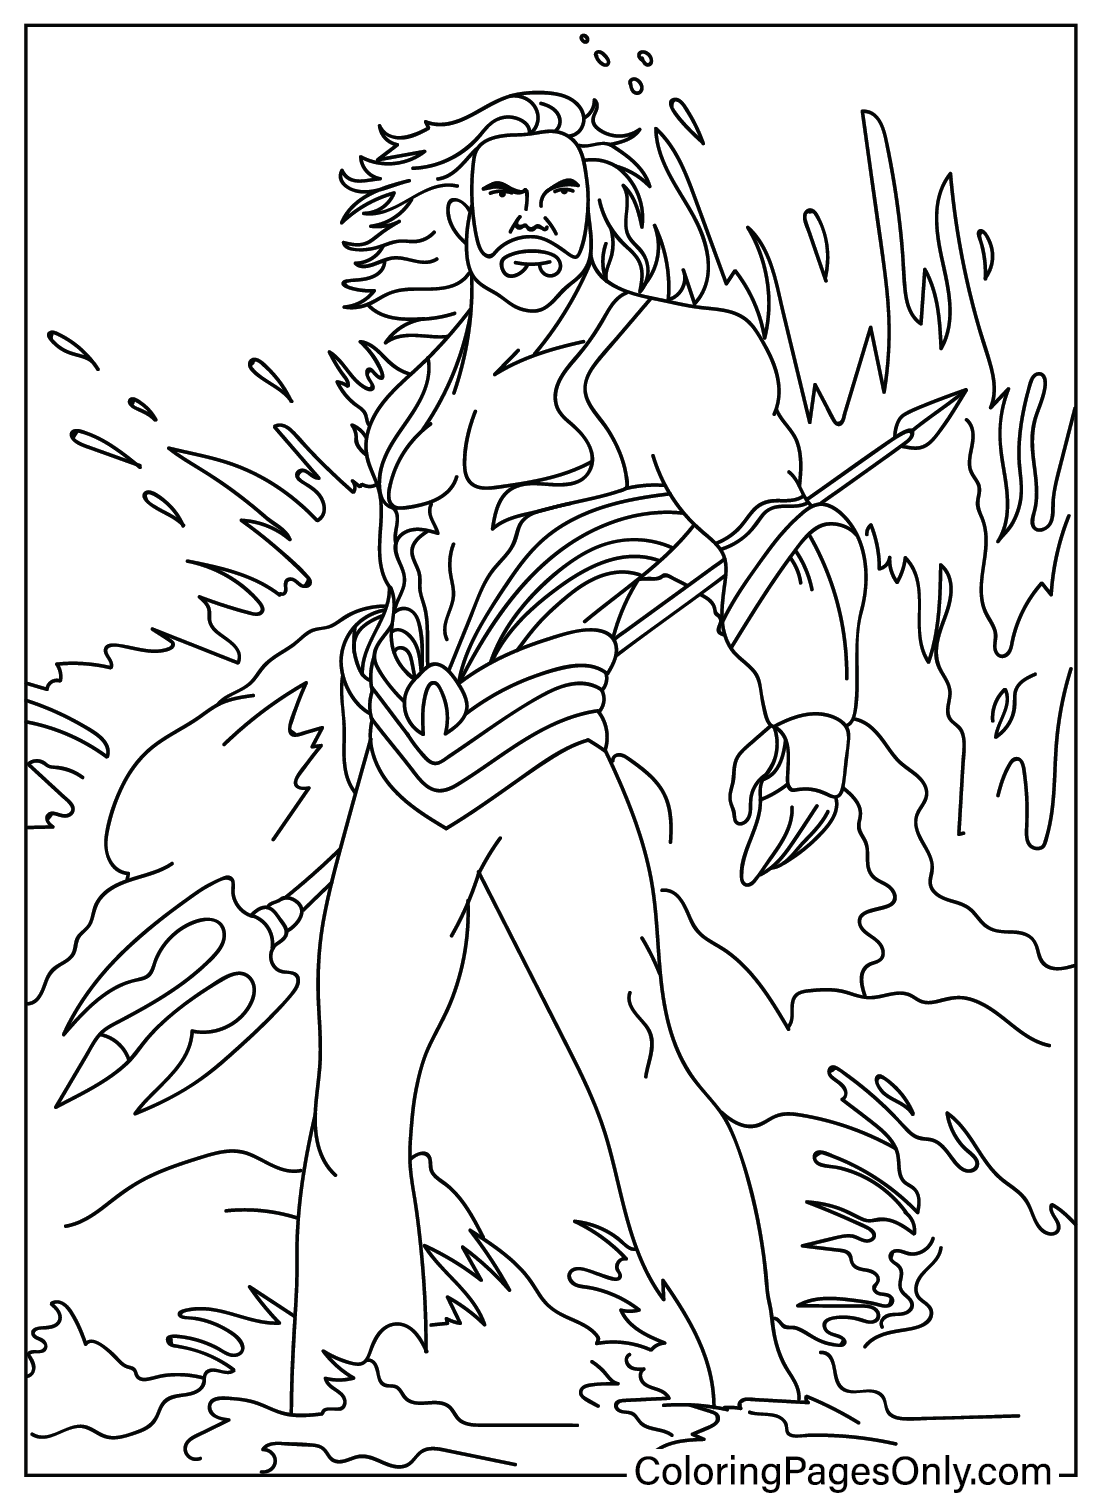 62 Free Printable Aquaman Coloring Pages